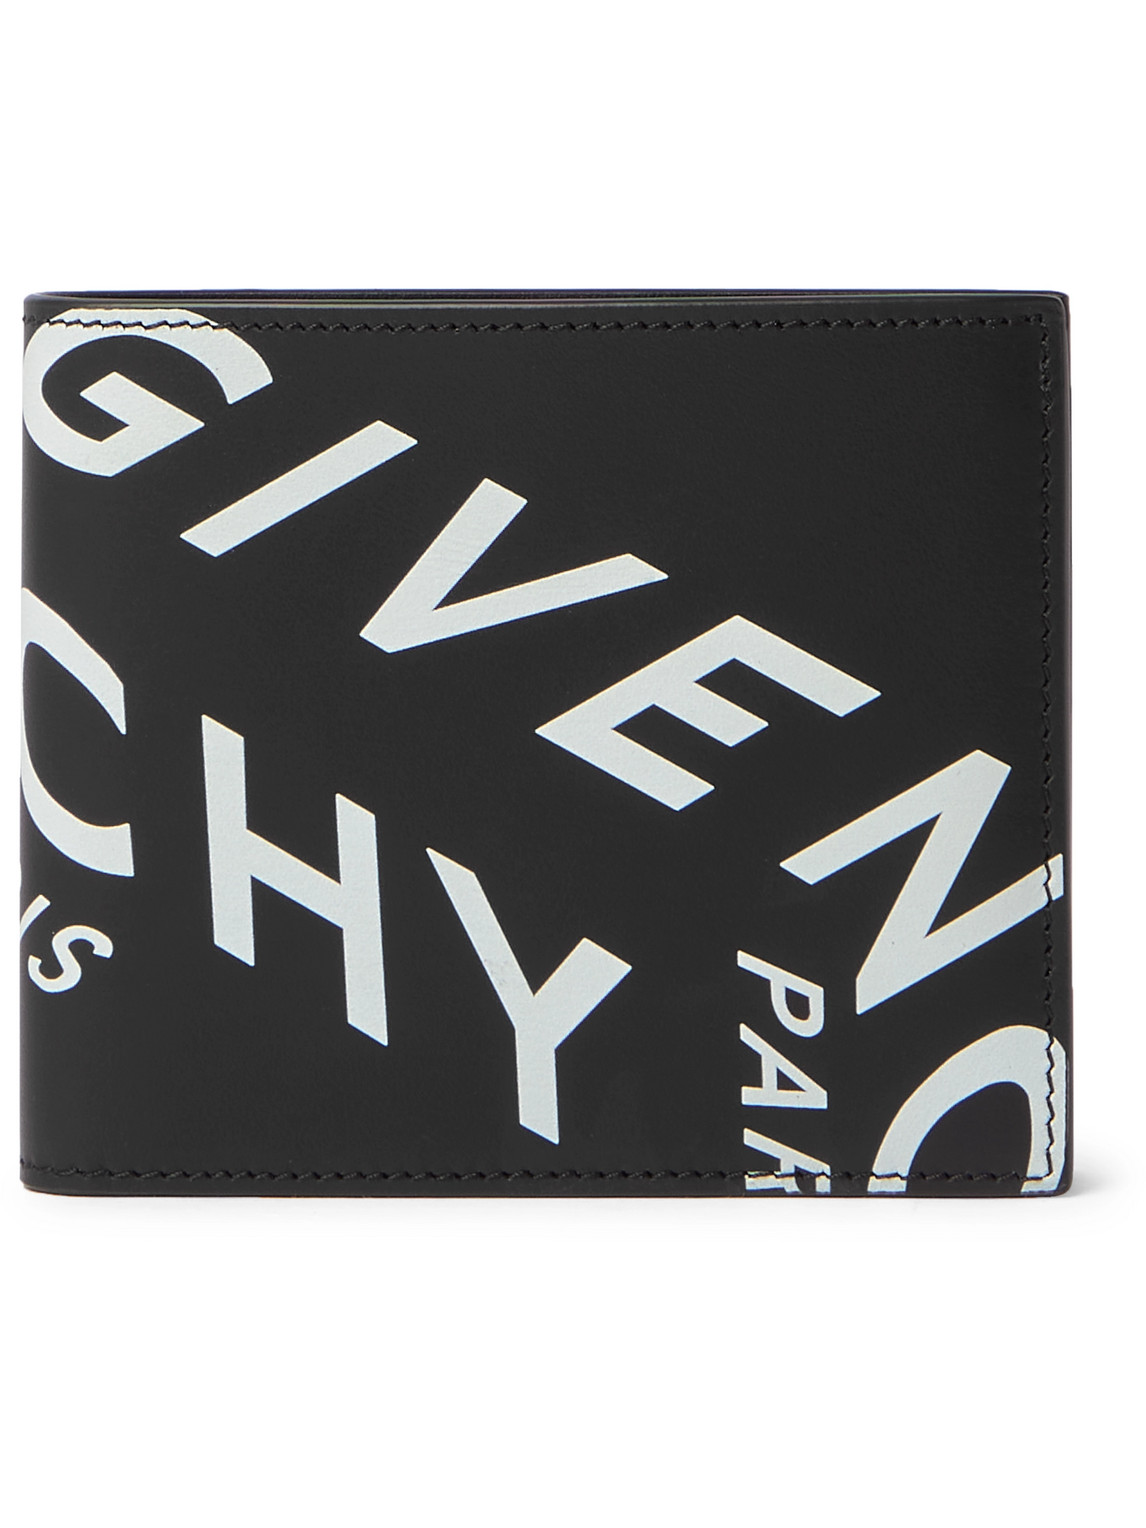 Givenchy Logo Leather Wallet for Men Mens Accessories Wallets and cardholders Save 53% 